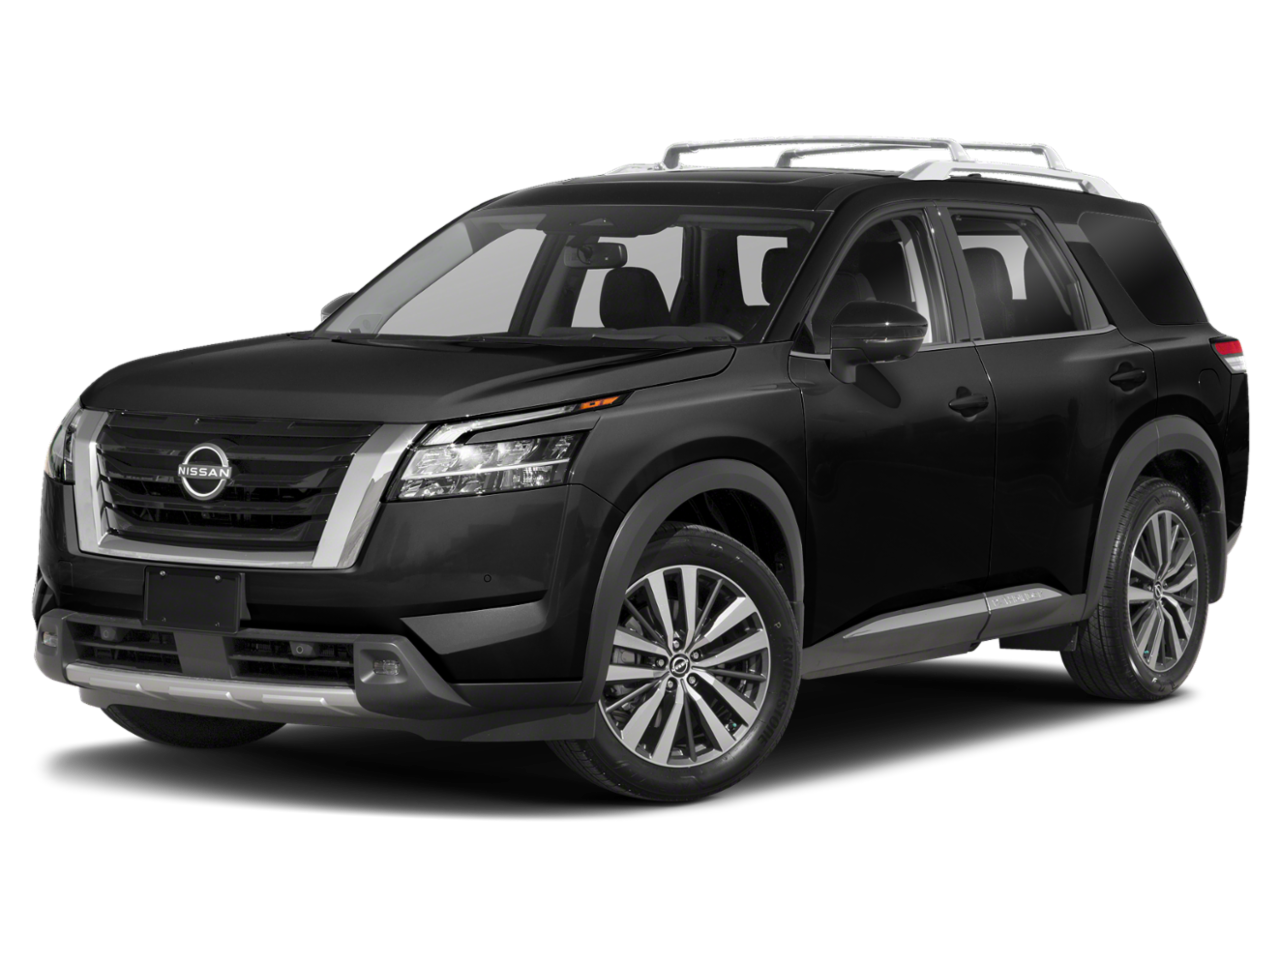 New 2023 Nissan Pathfinder Specials and Lease Deals in Bradley at Hove